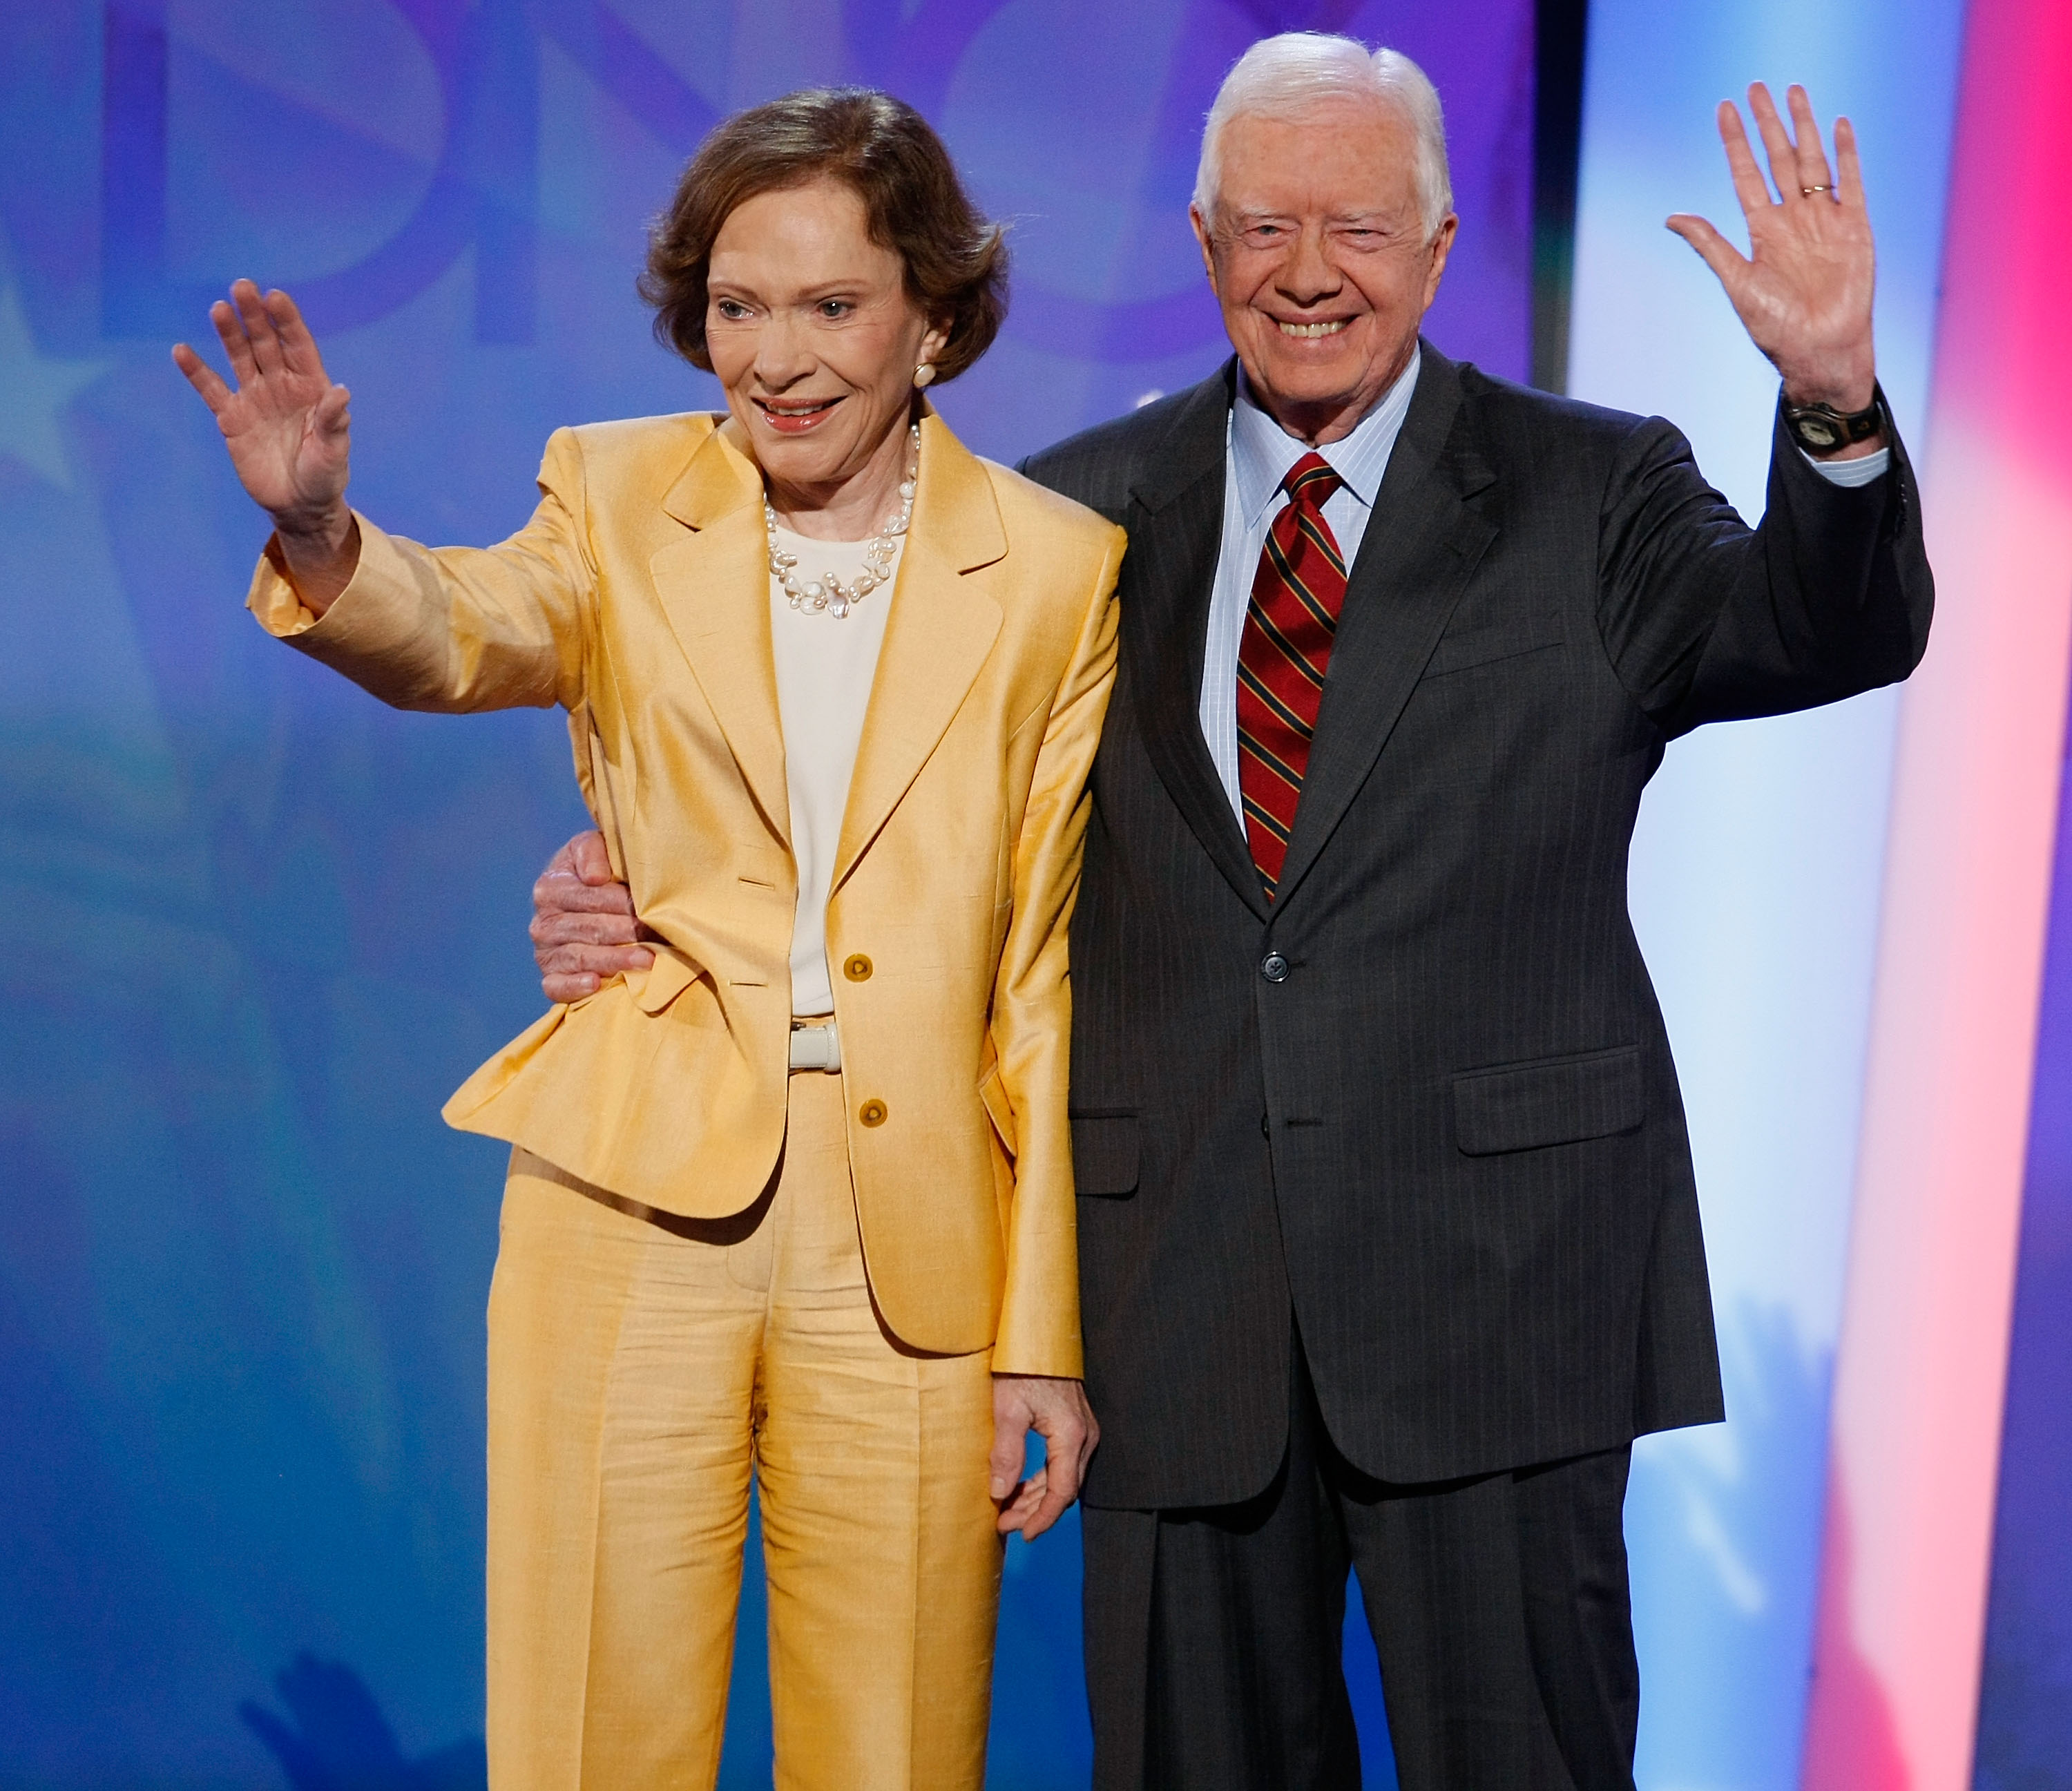 Former U.S. First Lady Rosalynn Carter and former U.S. President Jimmy Carter at the Democratic National Convention in Denver, Colorado on August 25, 2008 | Source: Getty Images